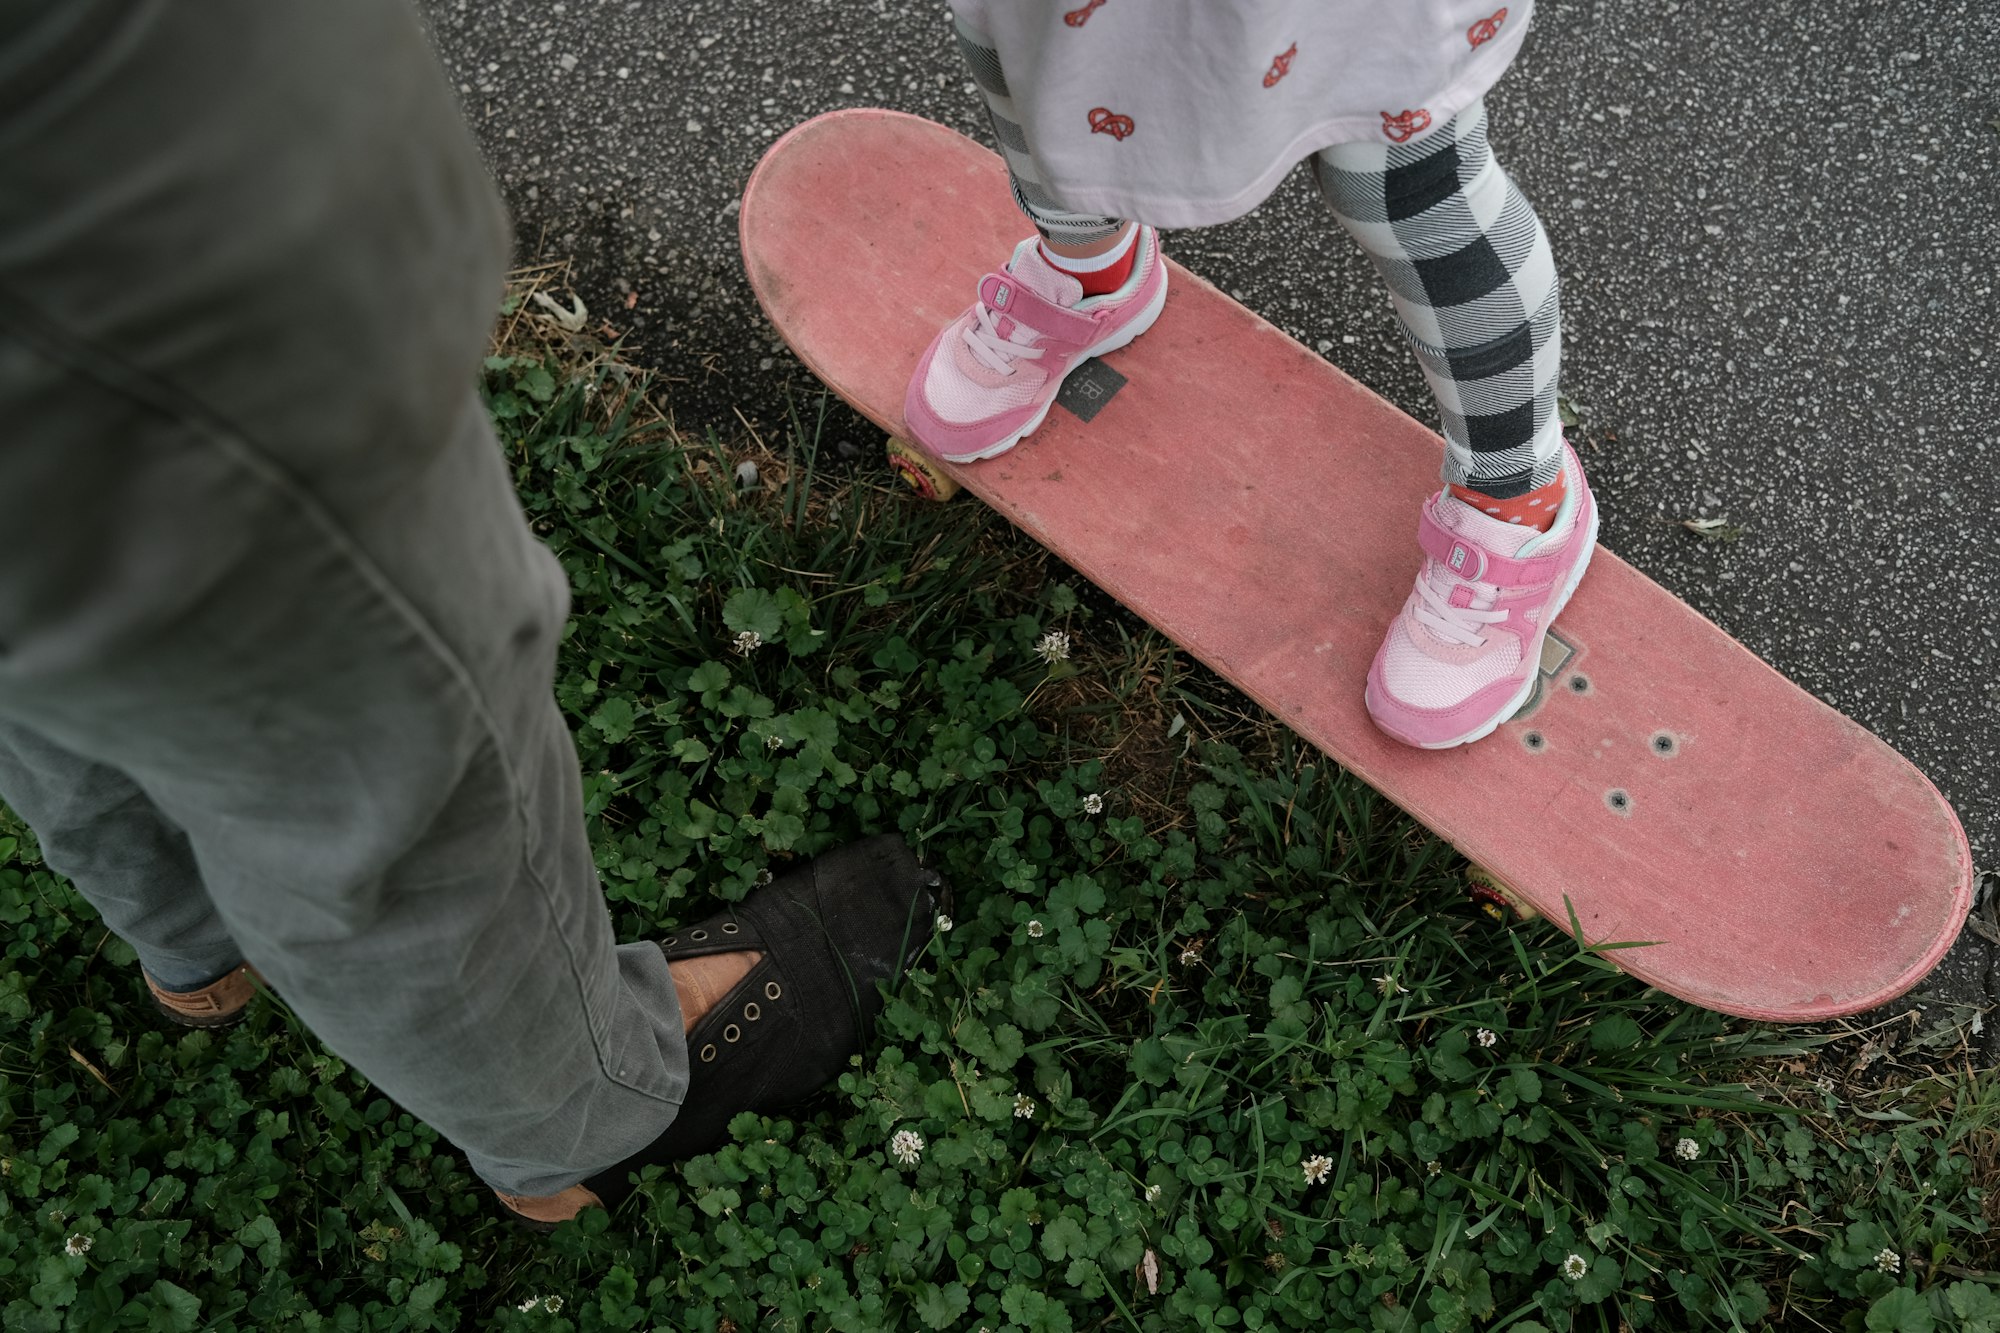 A Dad and his daughter playing together on a skateboard.